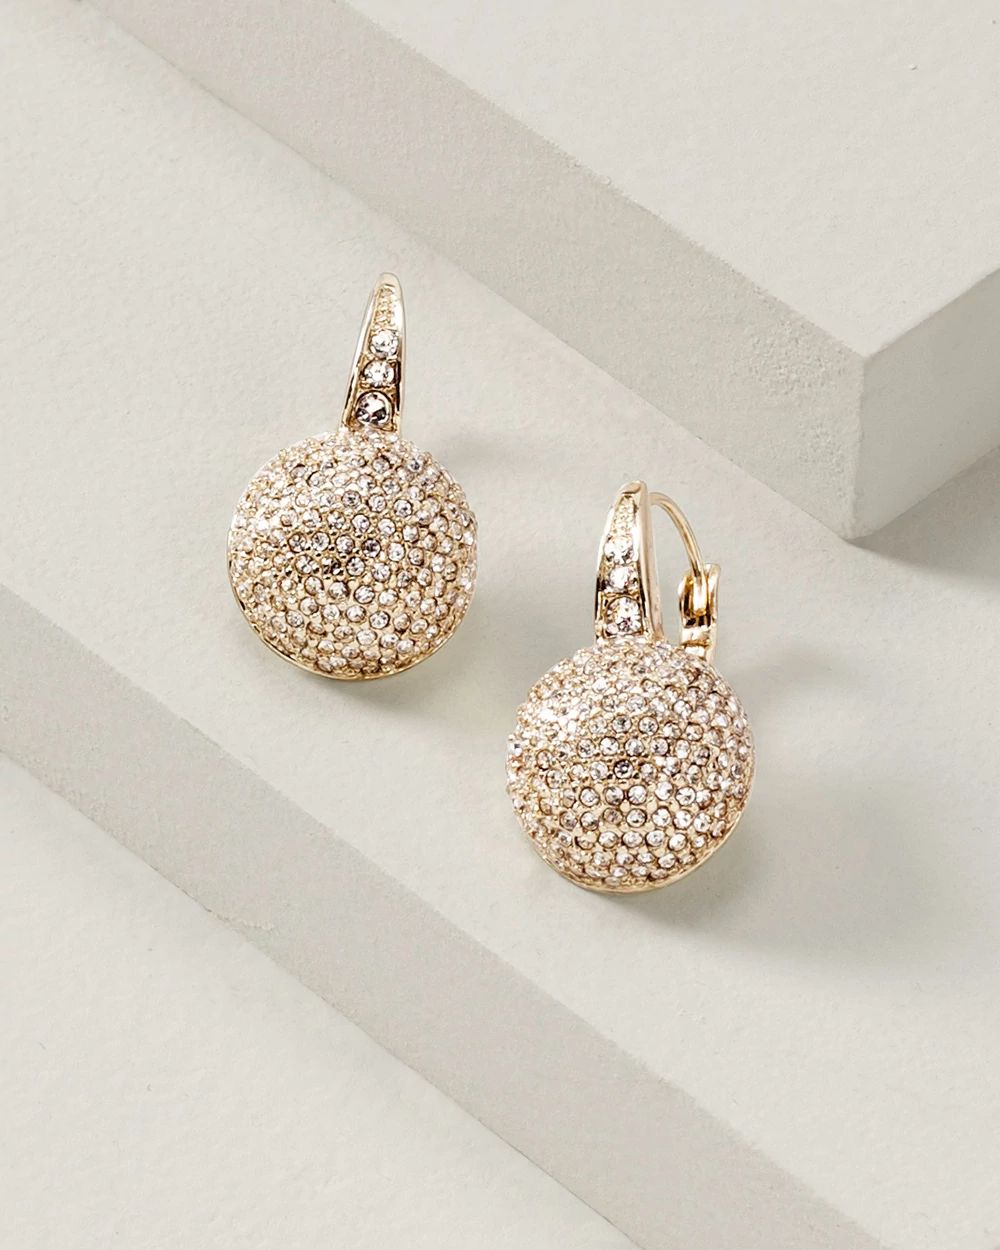 Gold Crystal Drop Earrings click to view larger image.